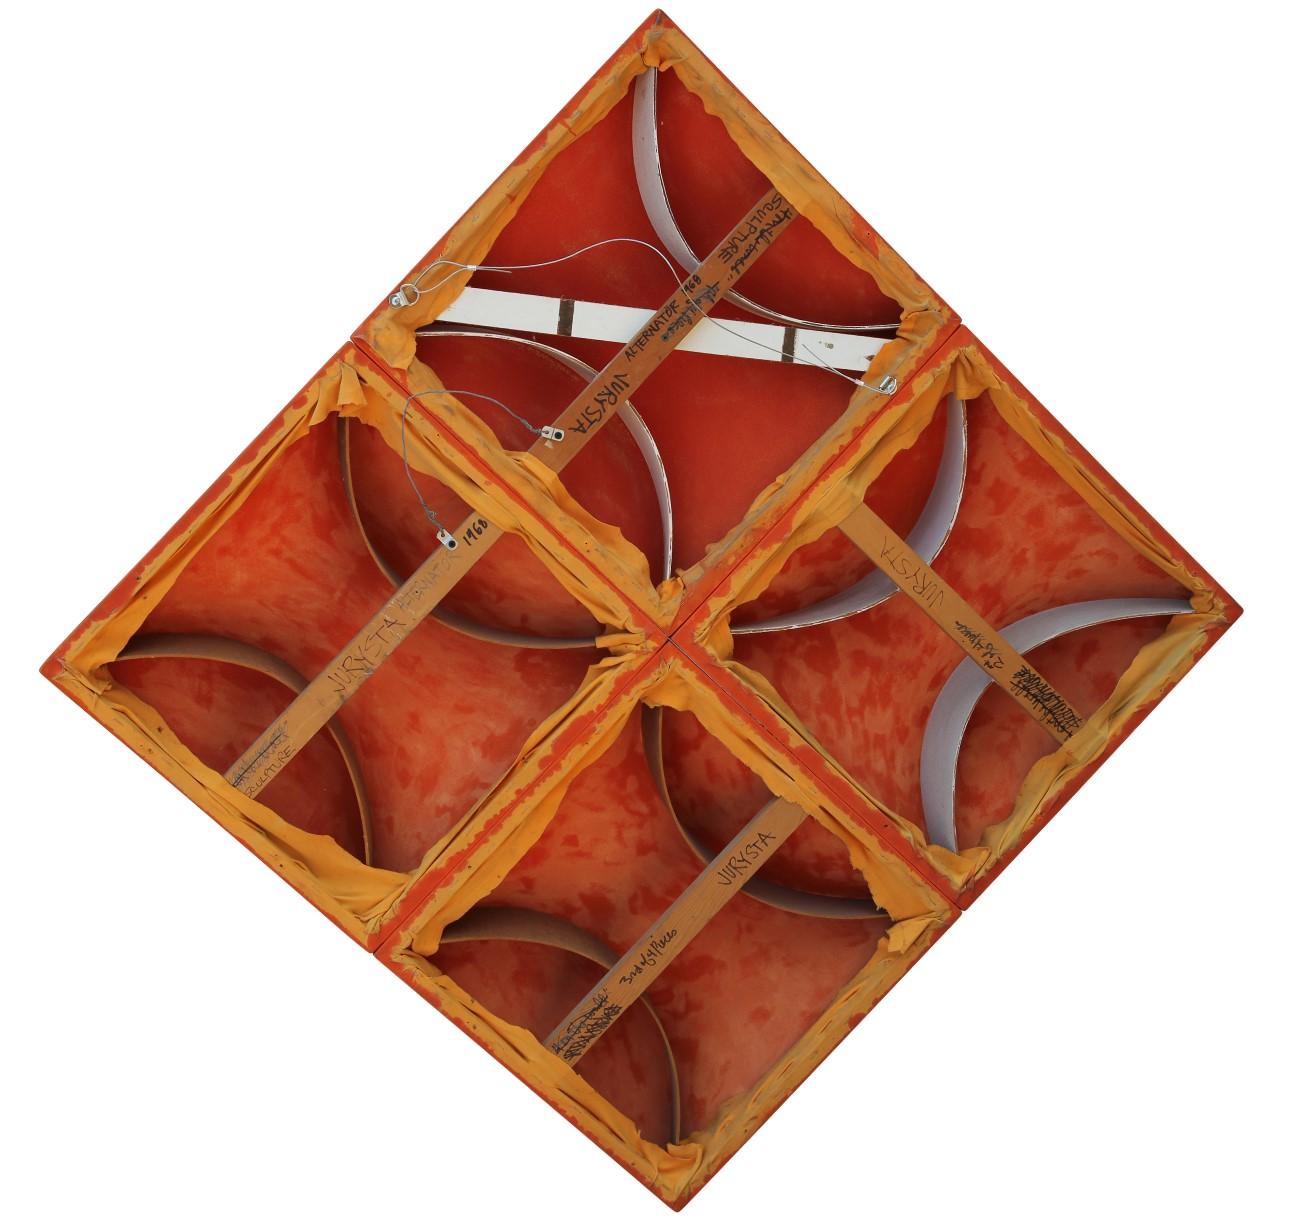 Square orange geometric wall sculpture with concave shapes. Each individual square is a different structure that was attached to create the entire work. The artist signed, titled, and dated the back of the sculpture.

Artist Biography: 
Gary Jurysta